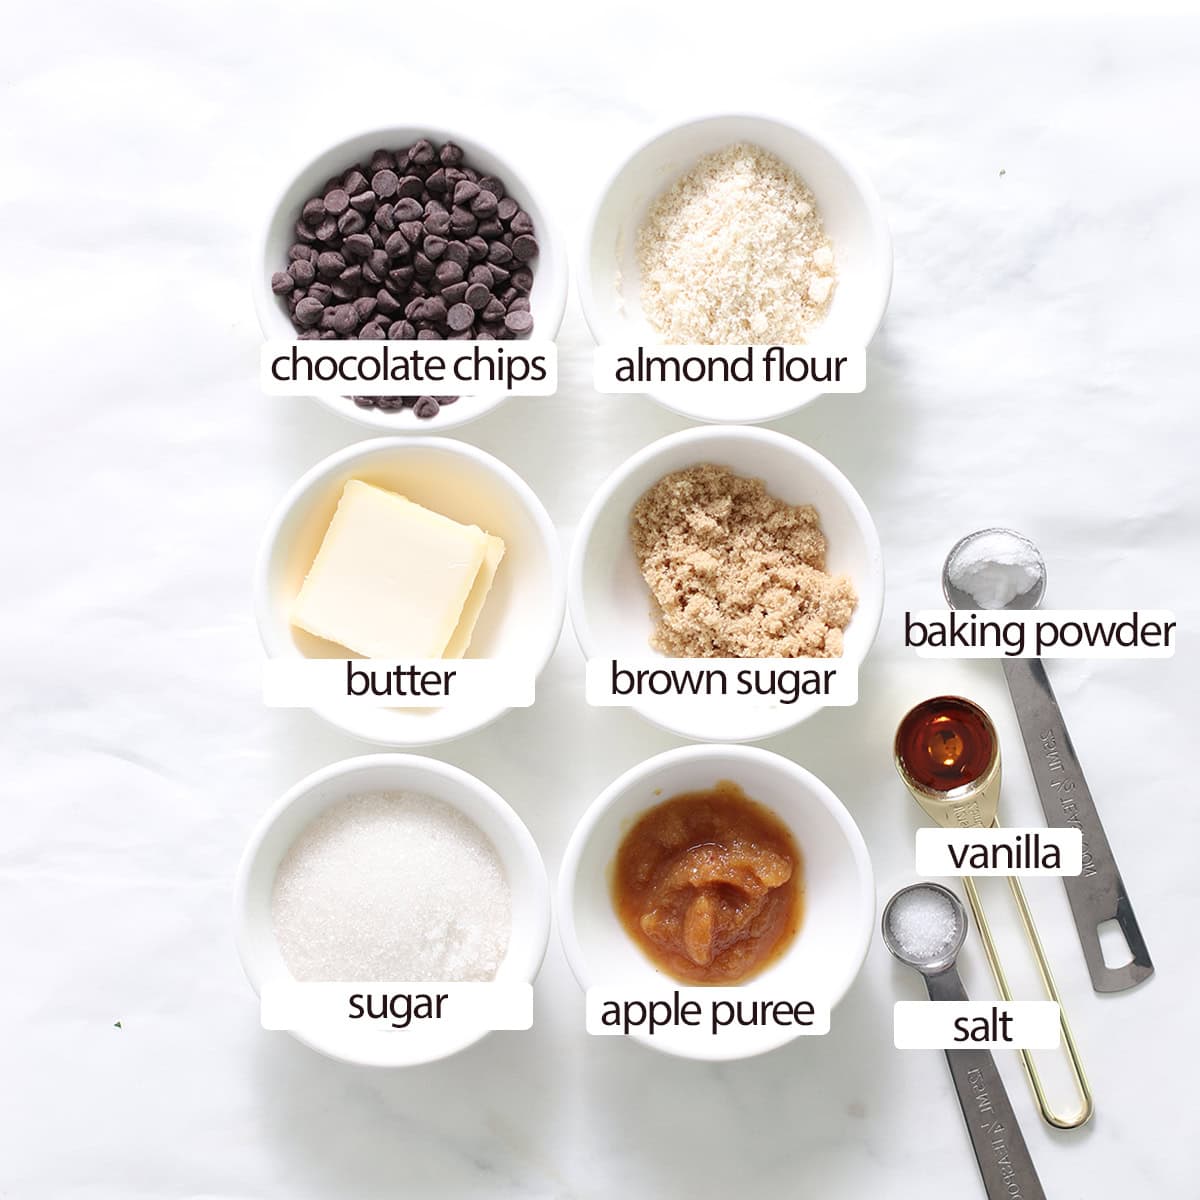 ingredients for thin and crispy chocolate chip cookies made with almond flour.